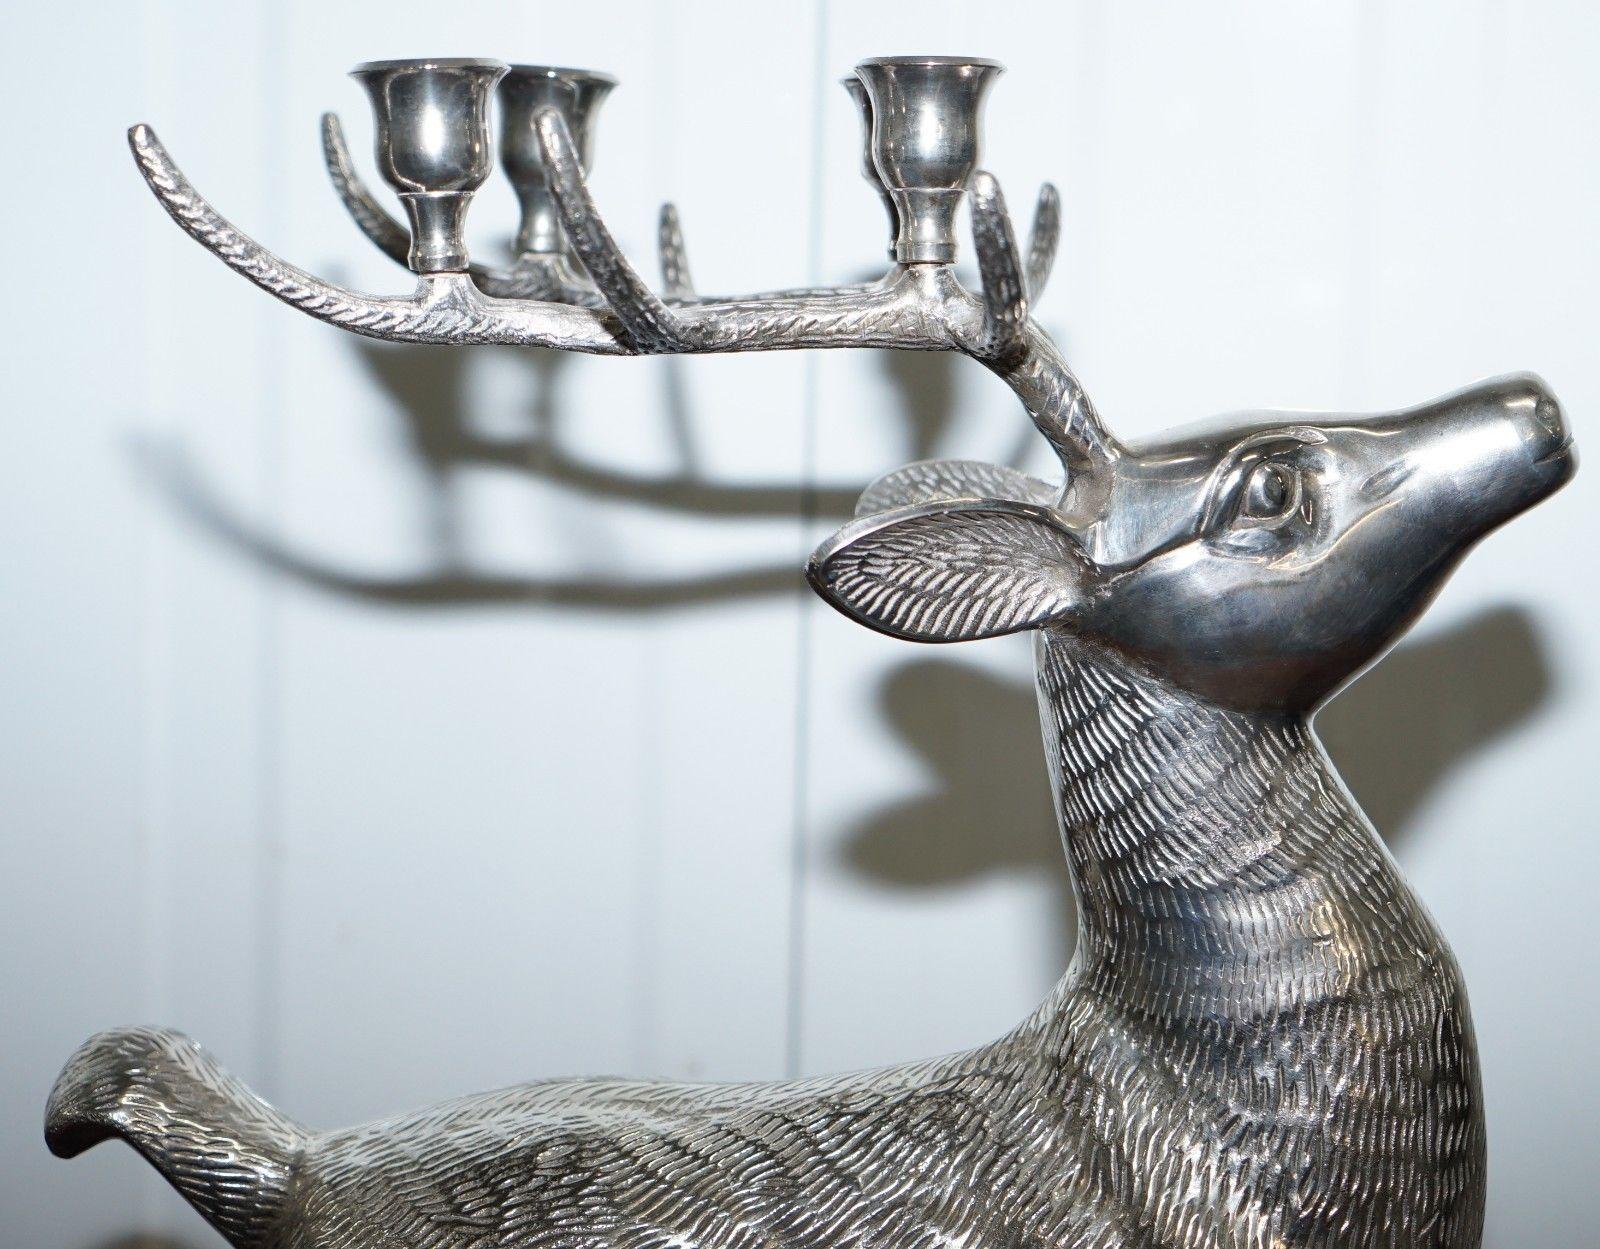 Contemporary Rare Ornately Cast Large Silver Plated Candle Stick Holder Reindeer Candelabra